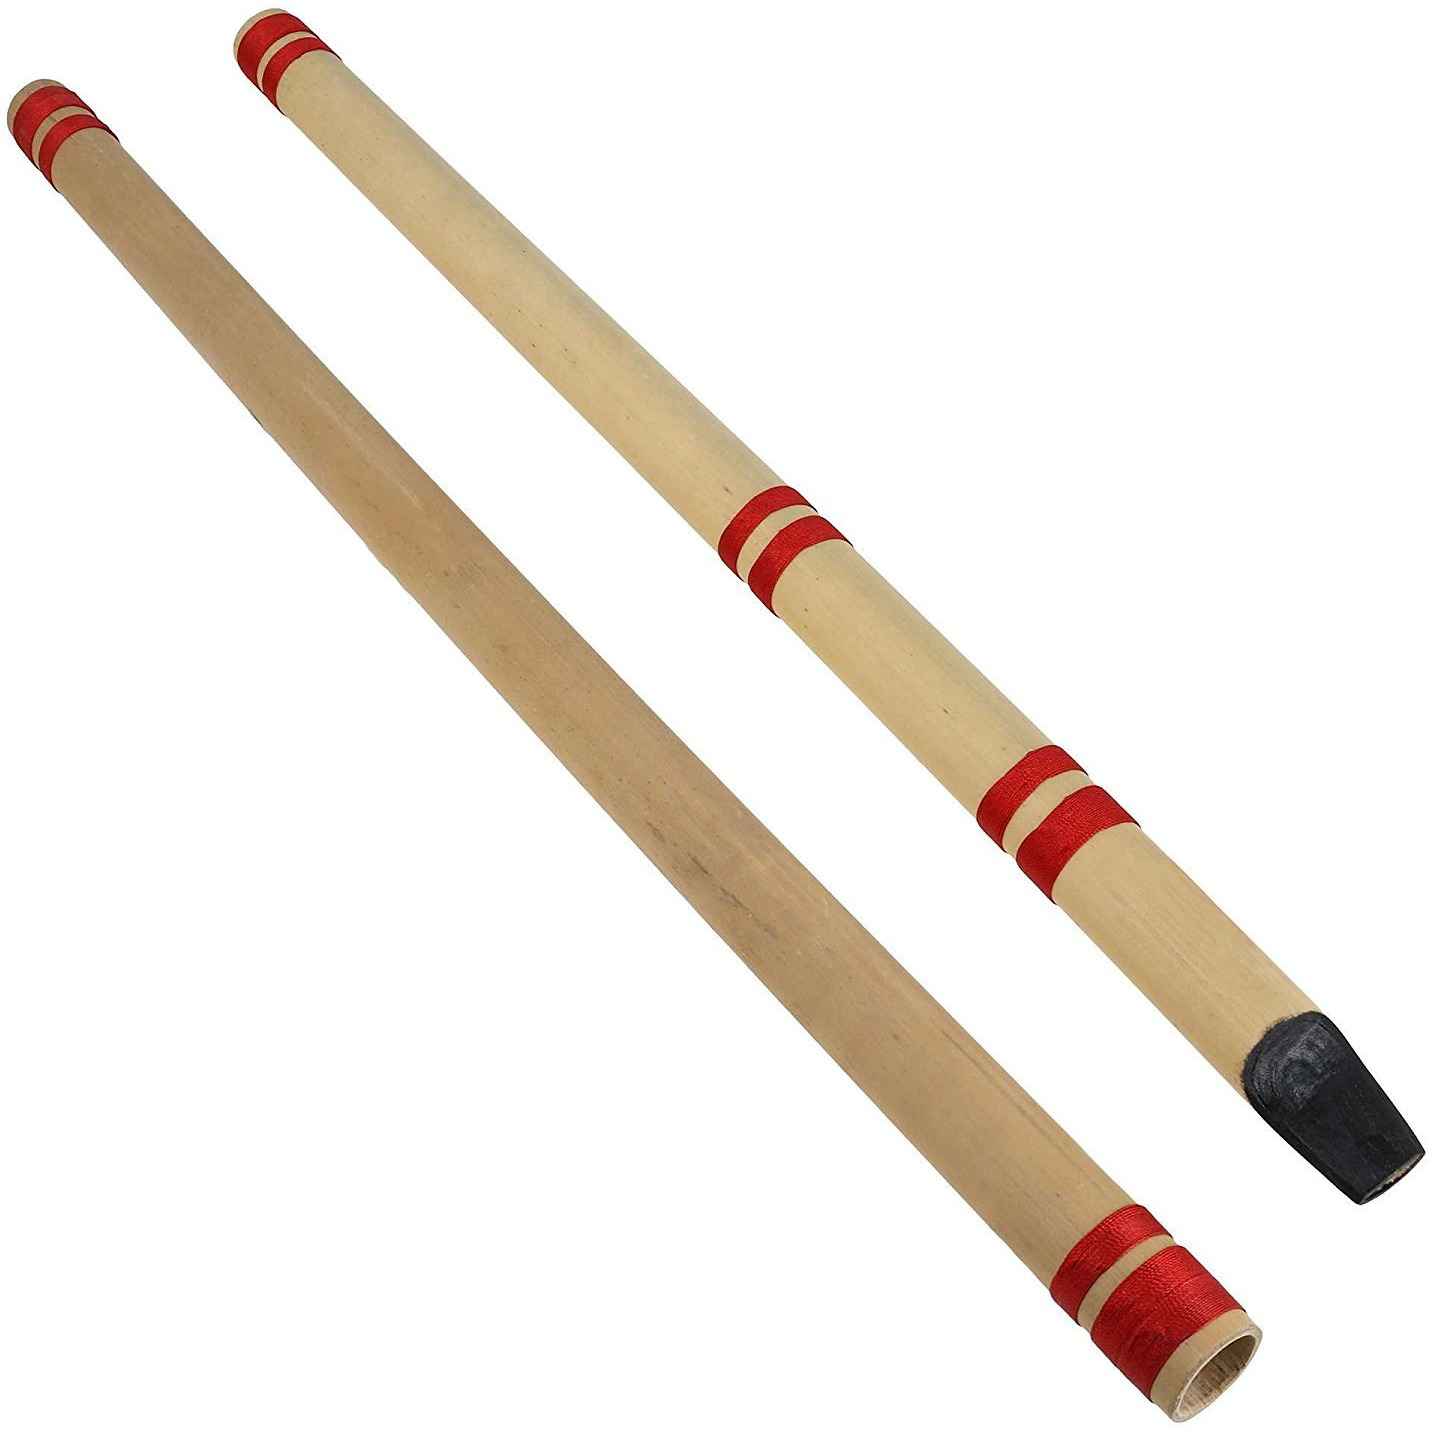 Winmaarc Indian Bamboo Flute Transverse and Fipple High Frequency Notes Set of 2